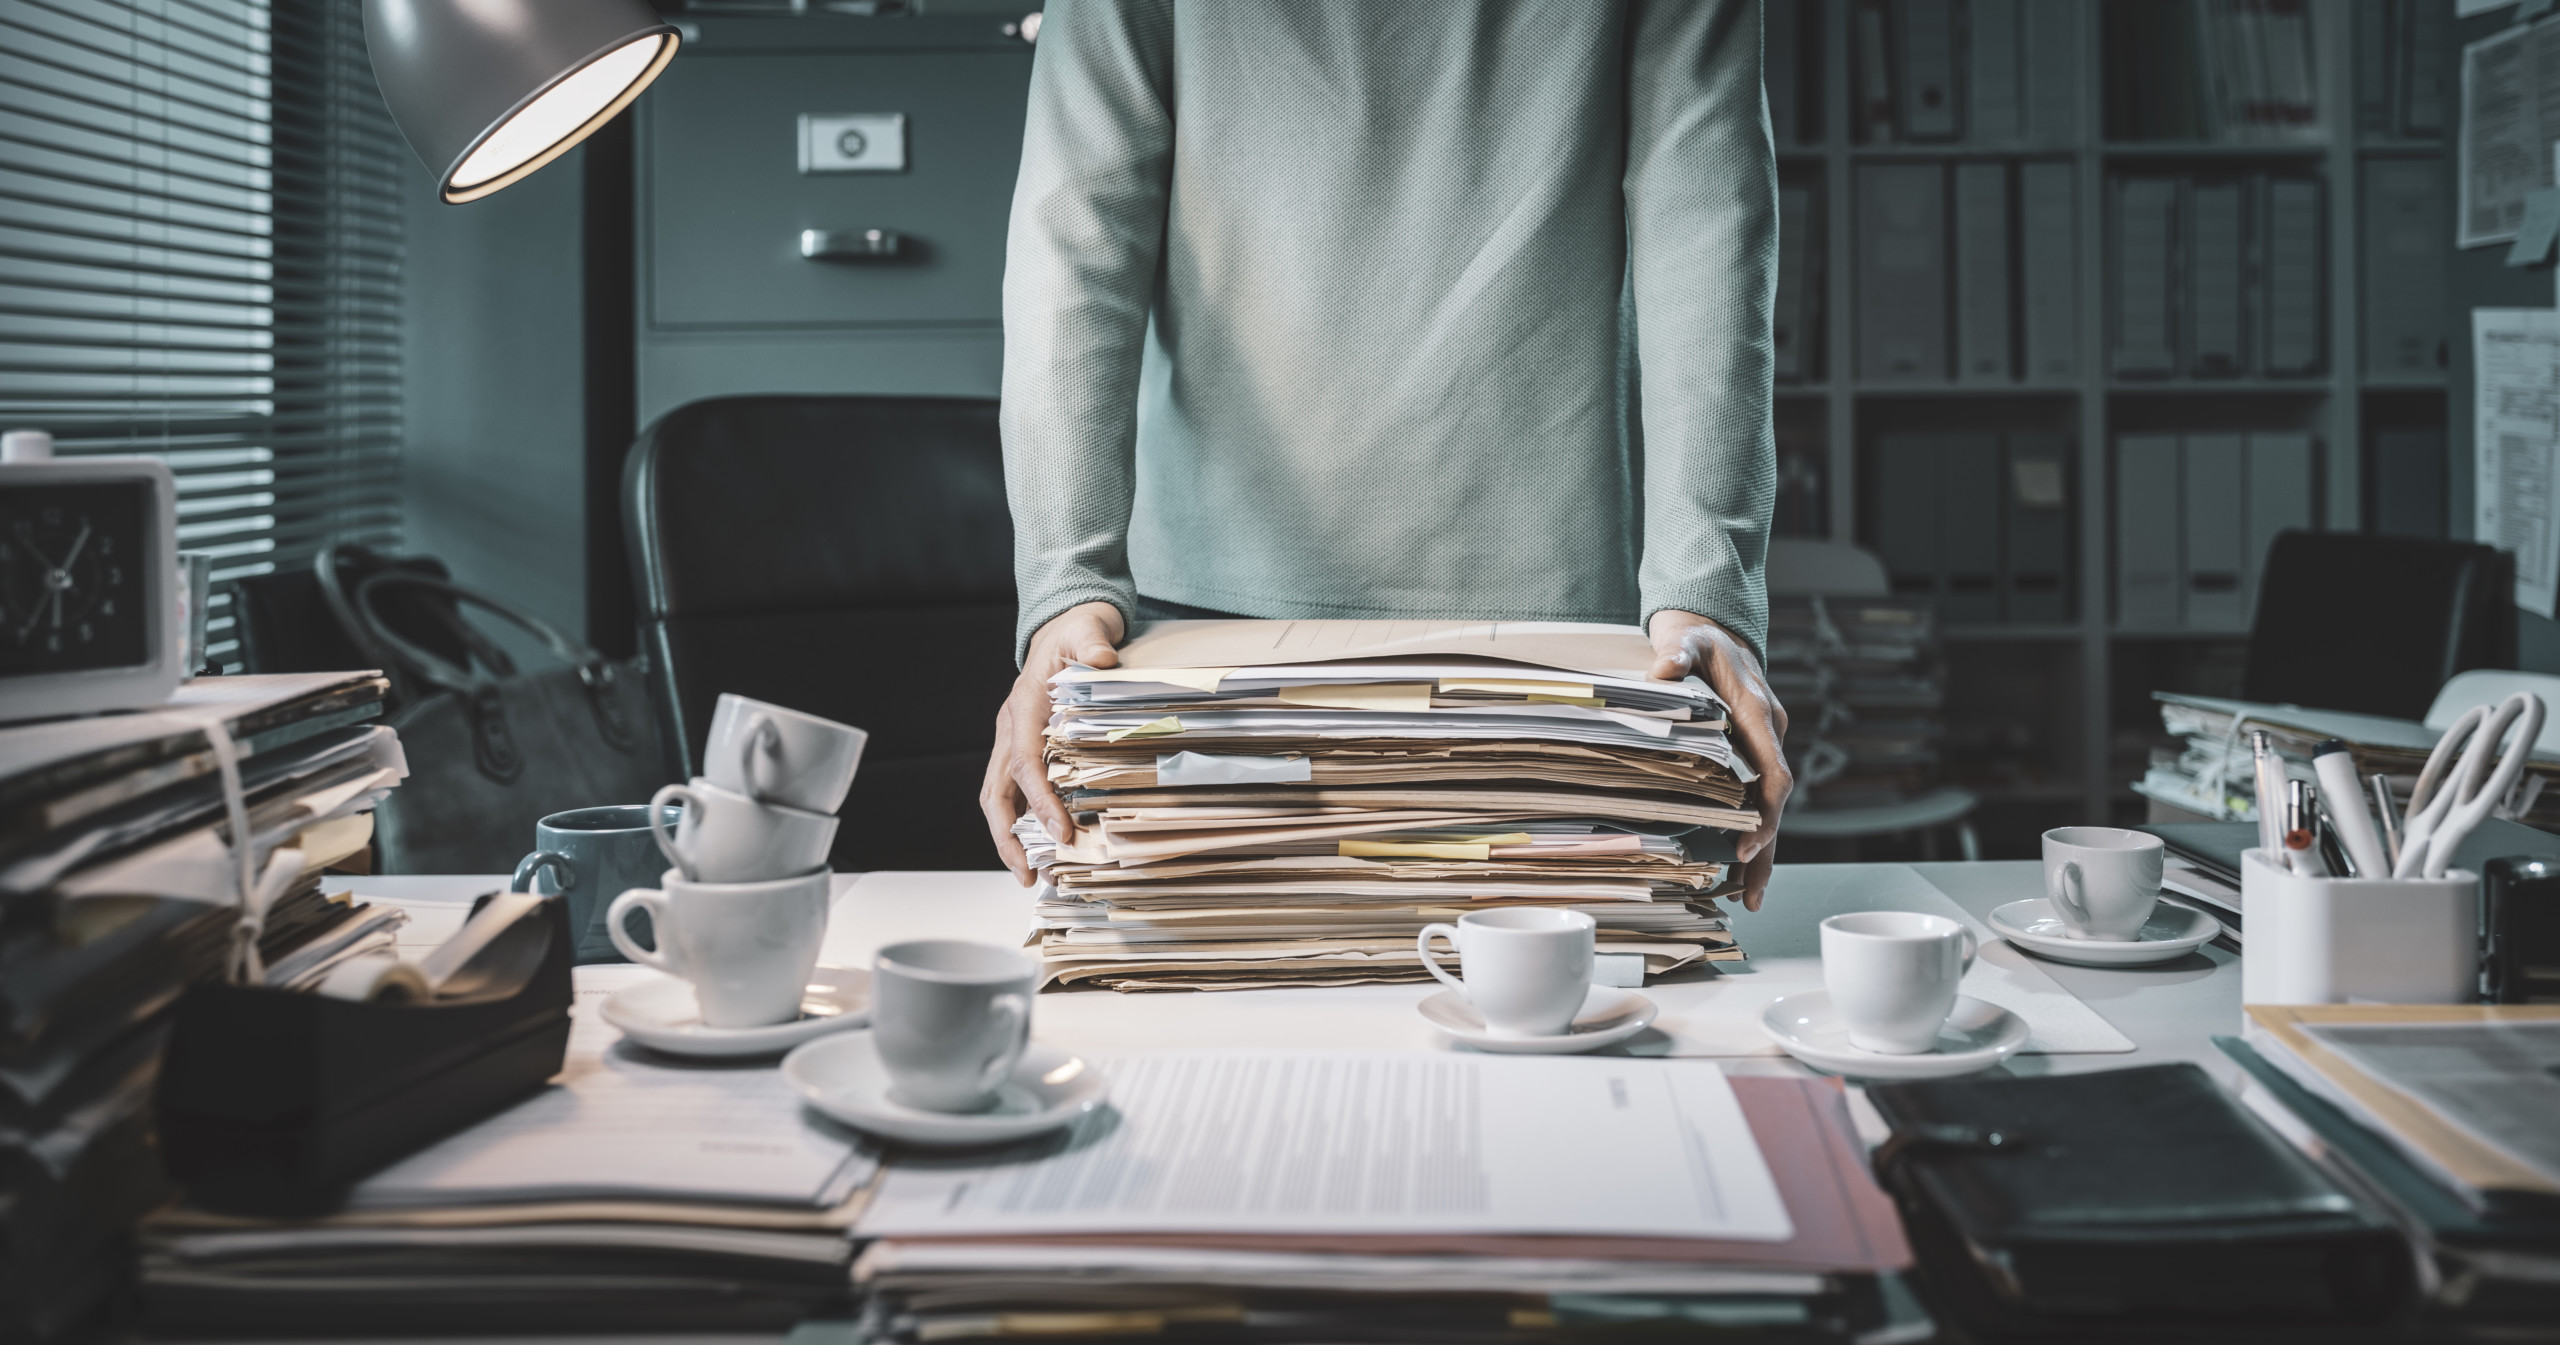 Male standing behind a desk, from shoulders to waist. He has his hands on a large stack of files which are on the desk, as are 6 coffee cups and more paper files.